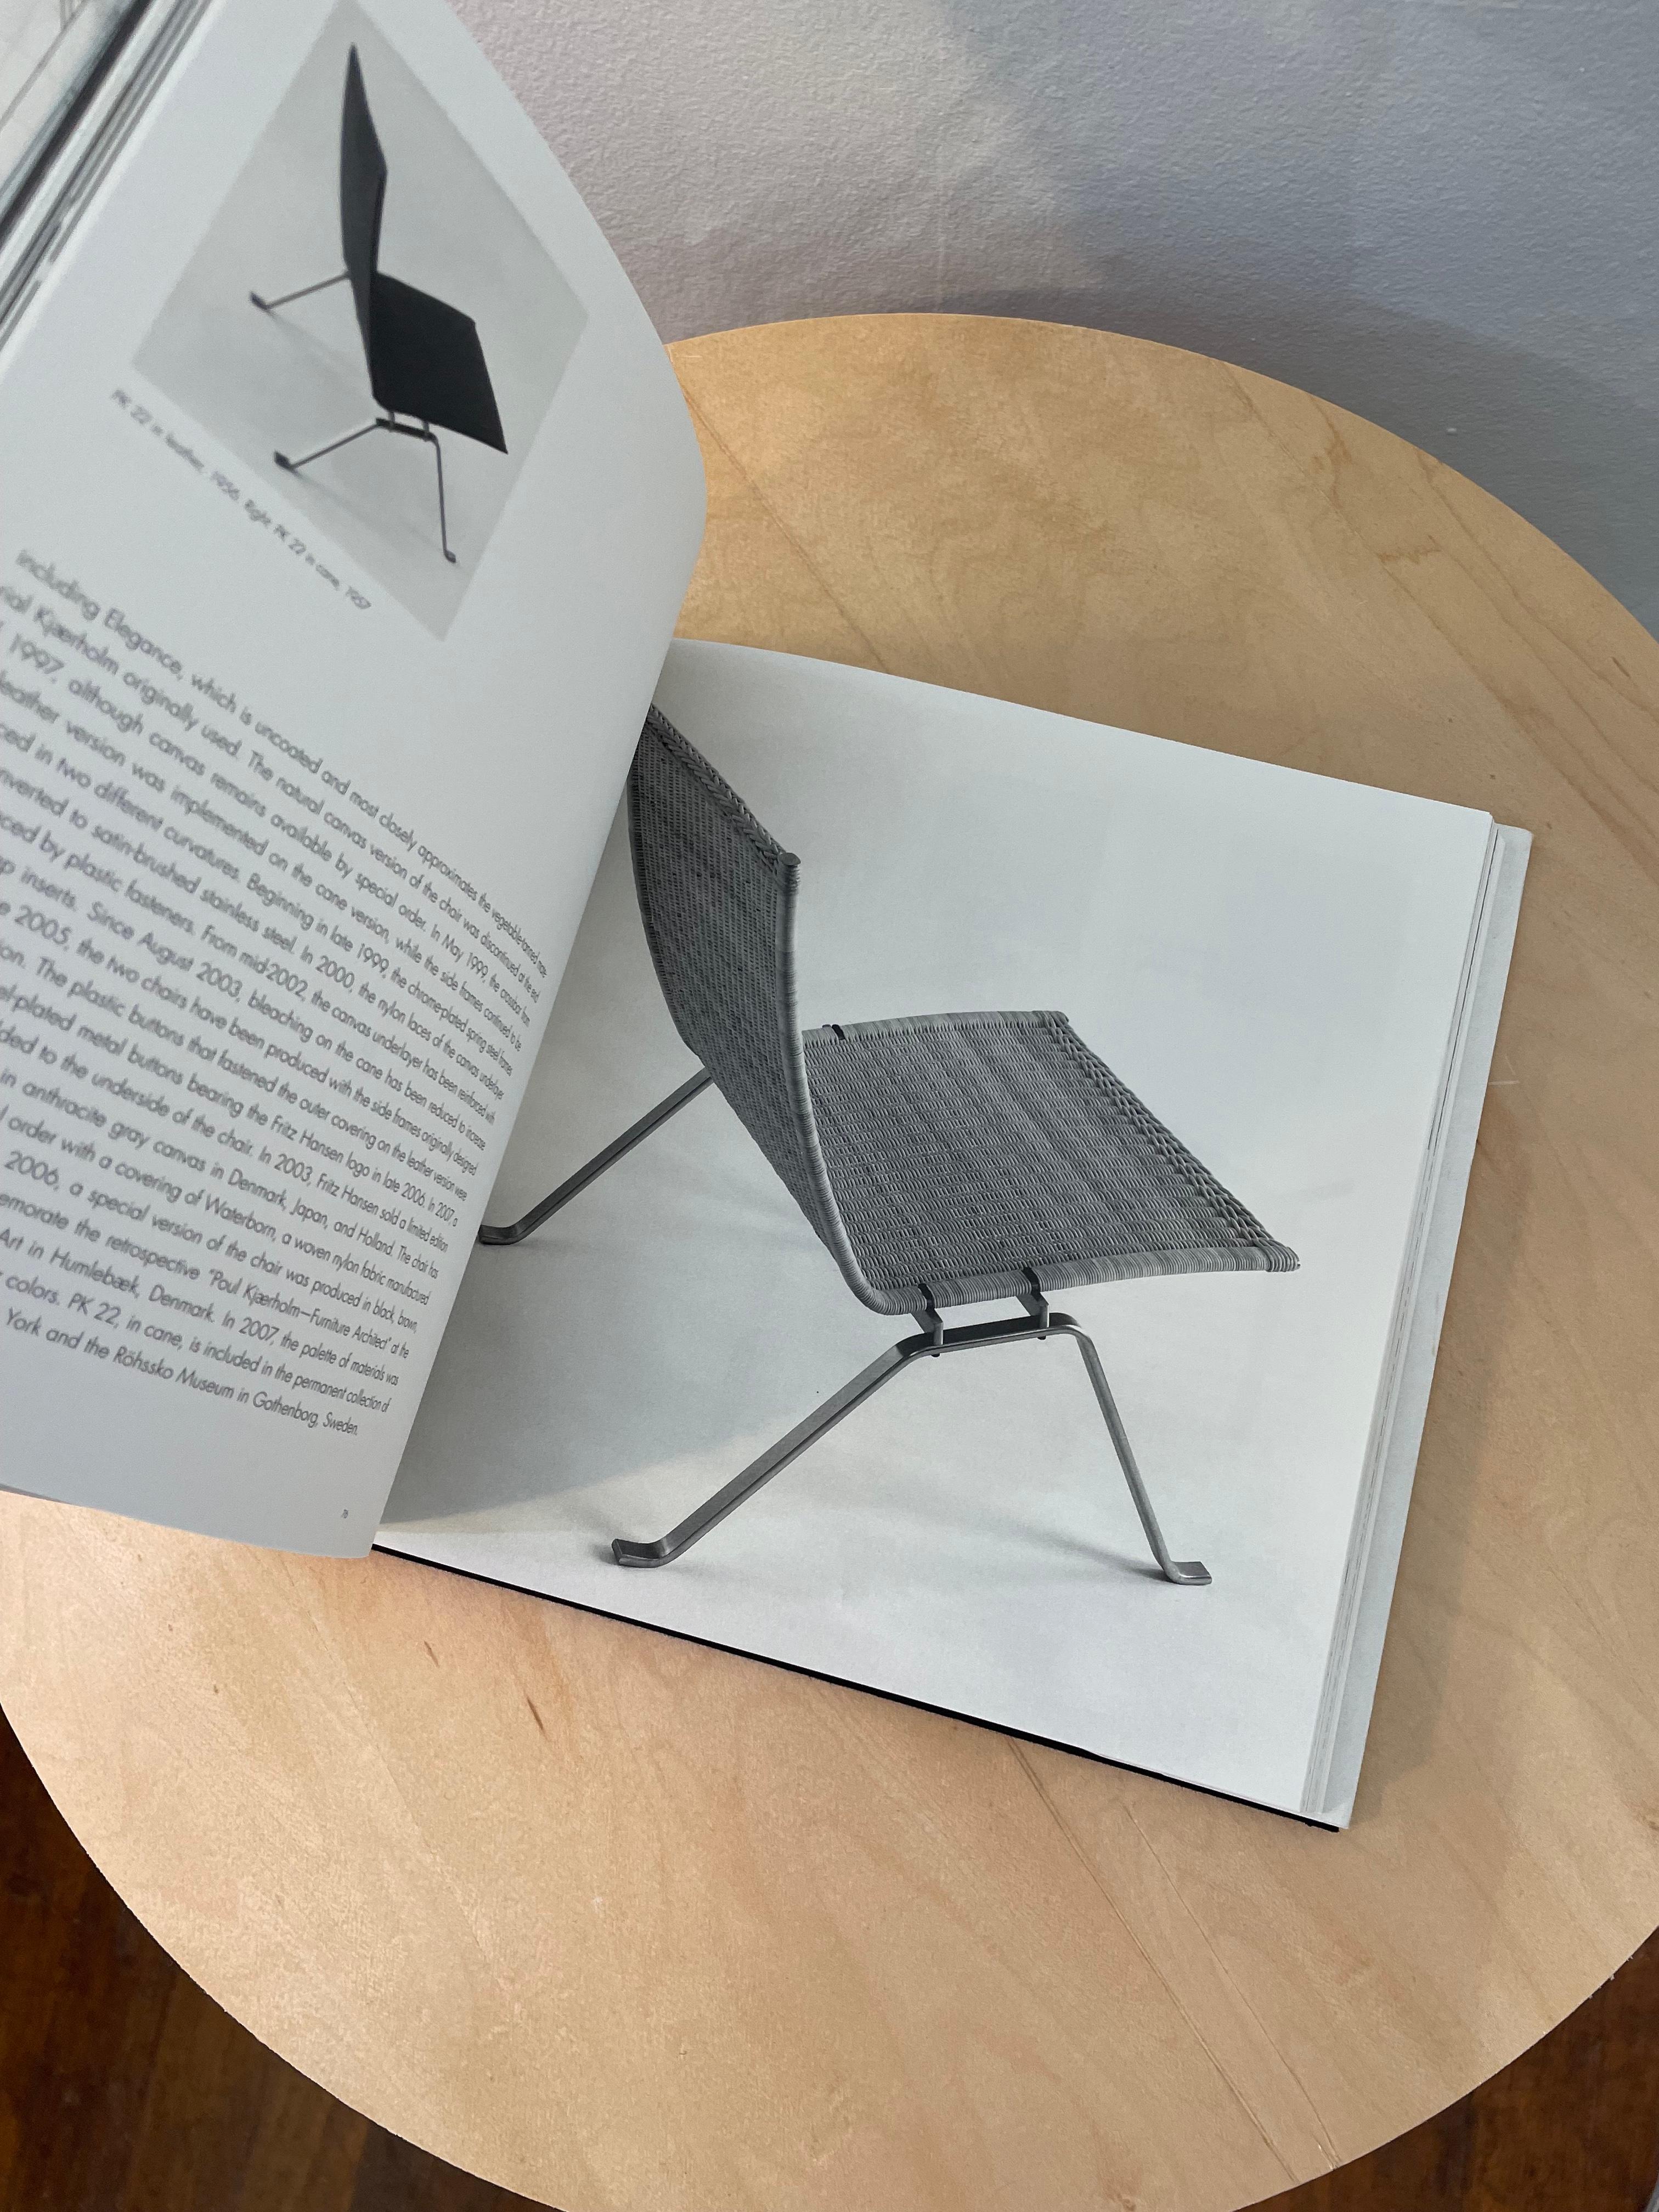 The Furniture of Poul Kjaerholm - Catalogue Raisonne In Good Condition For Sale In Tivoli, NY